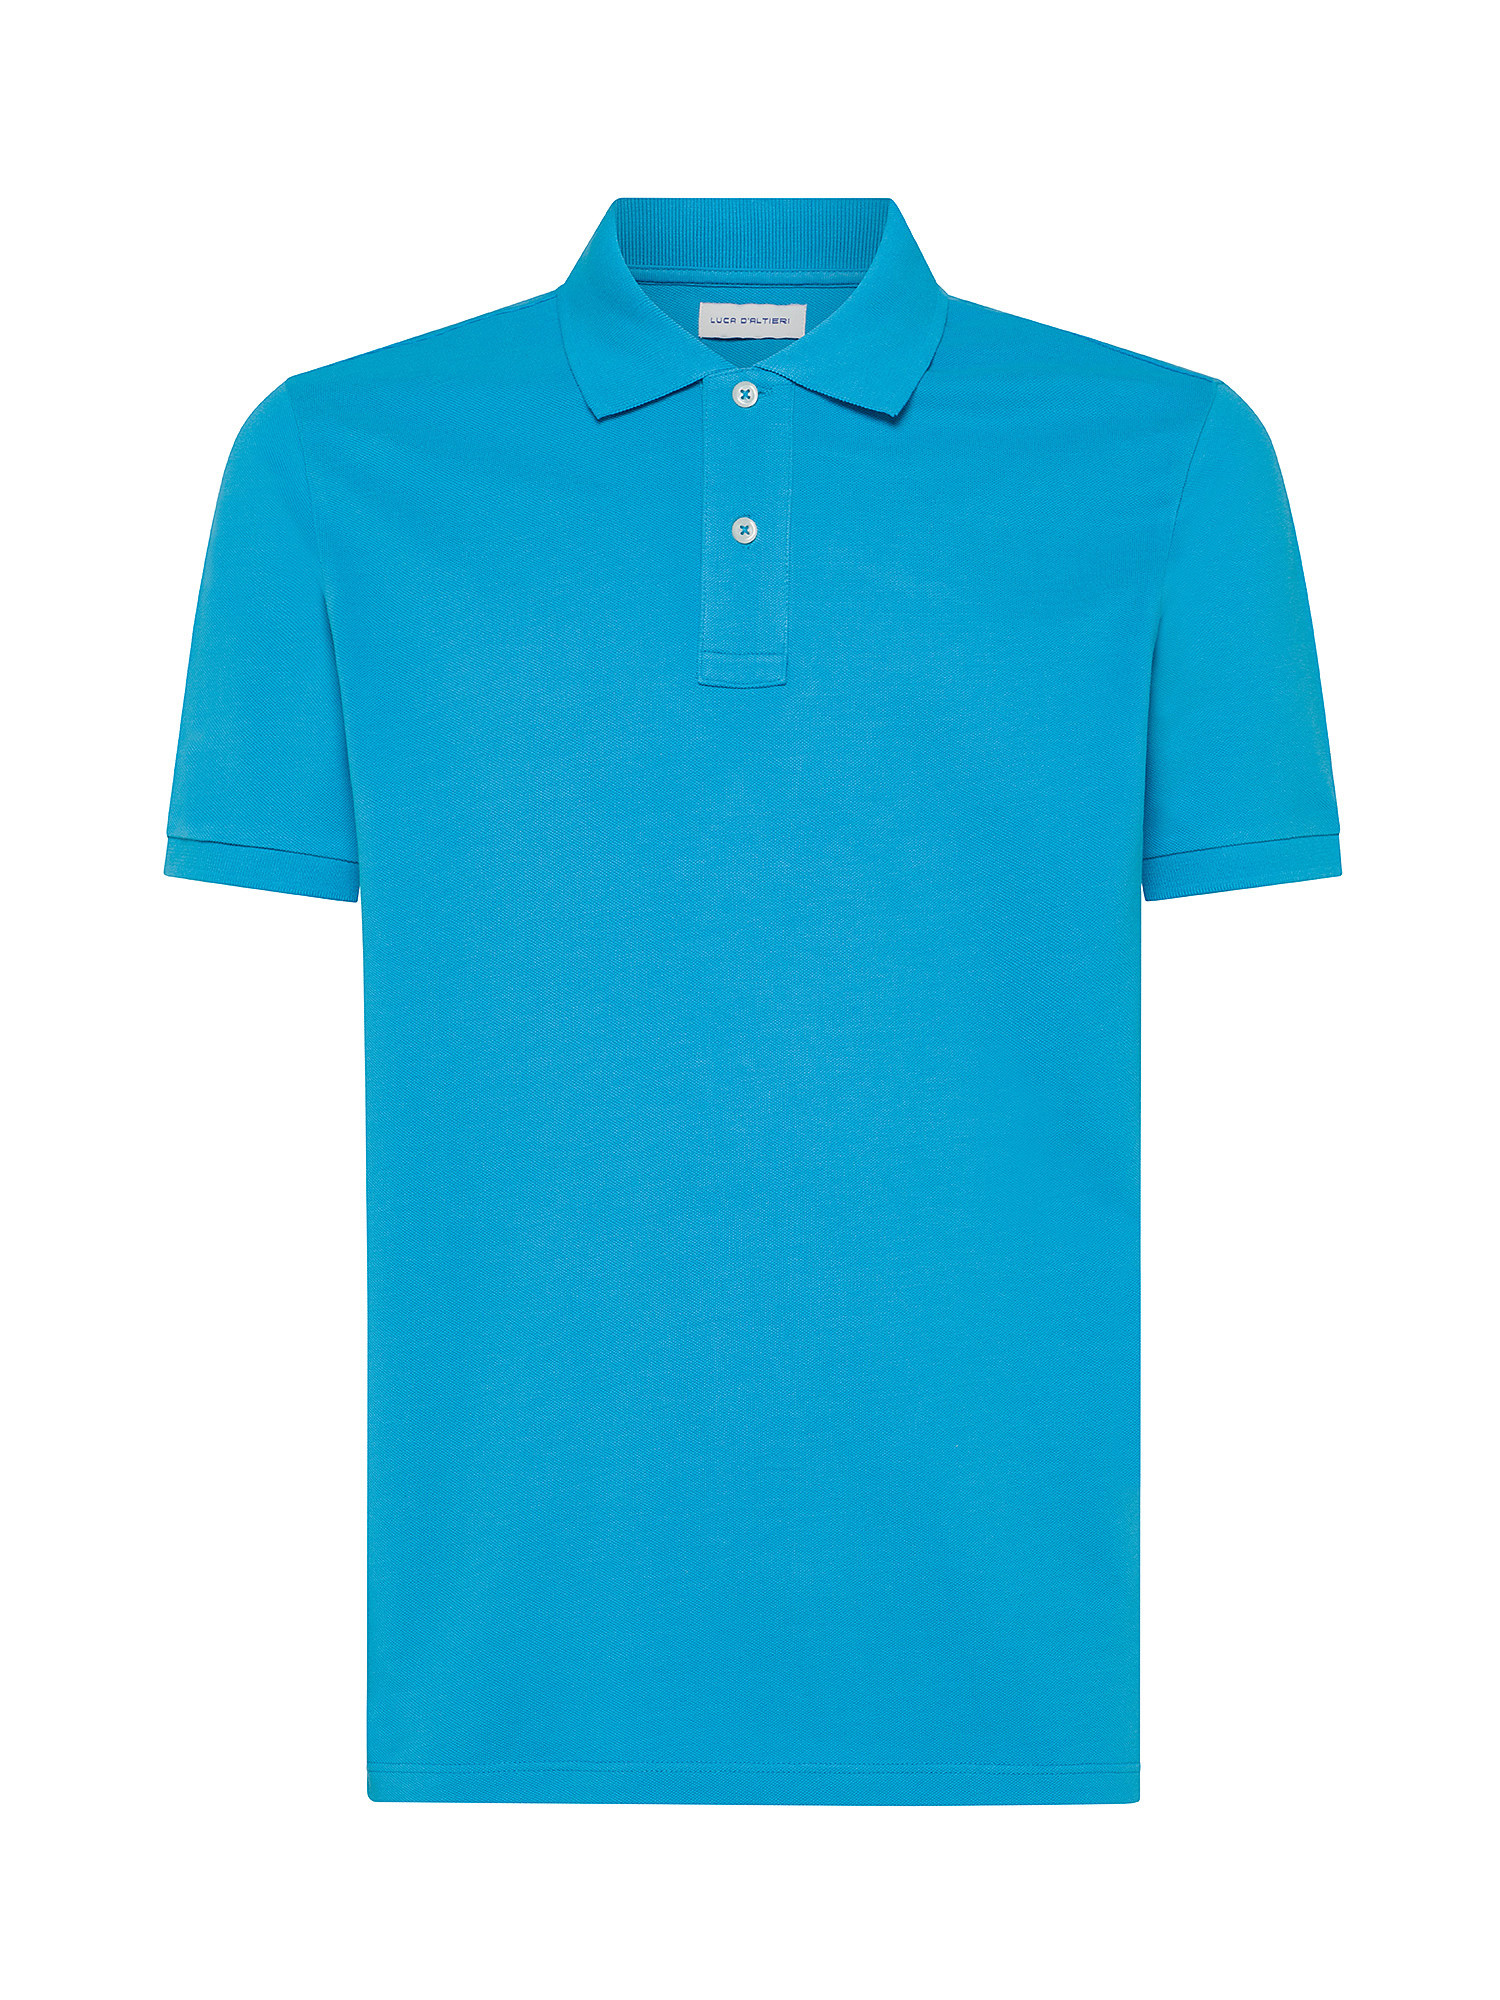 Luca D'Altieri - Polo in pure cotton, Turquoise, large image number 0